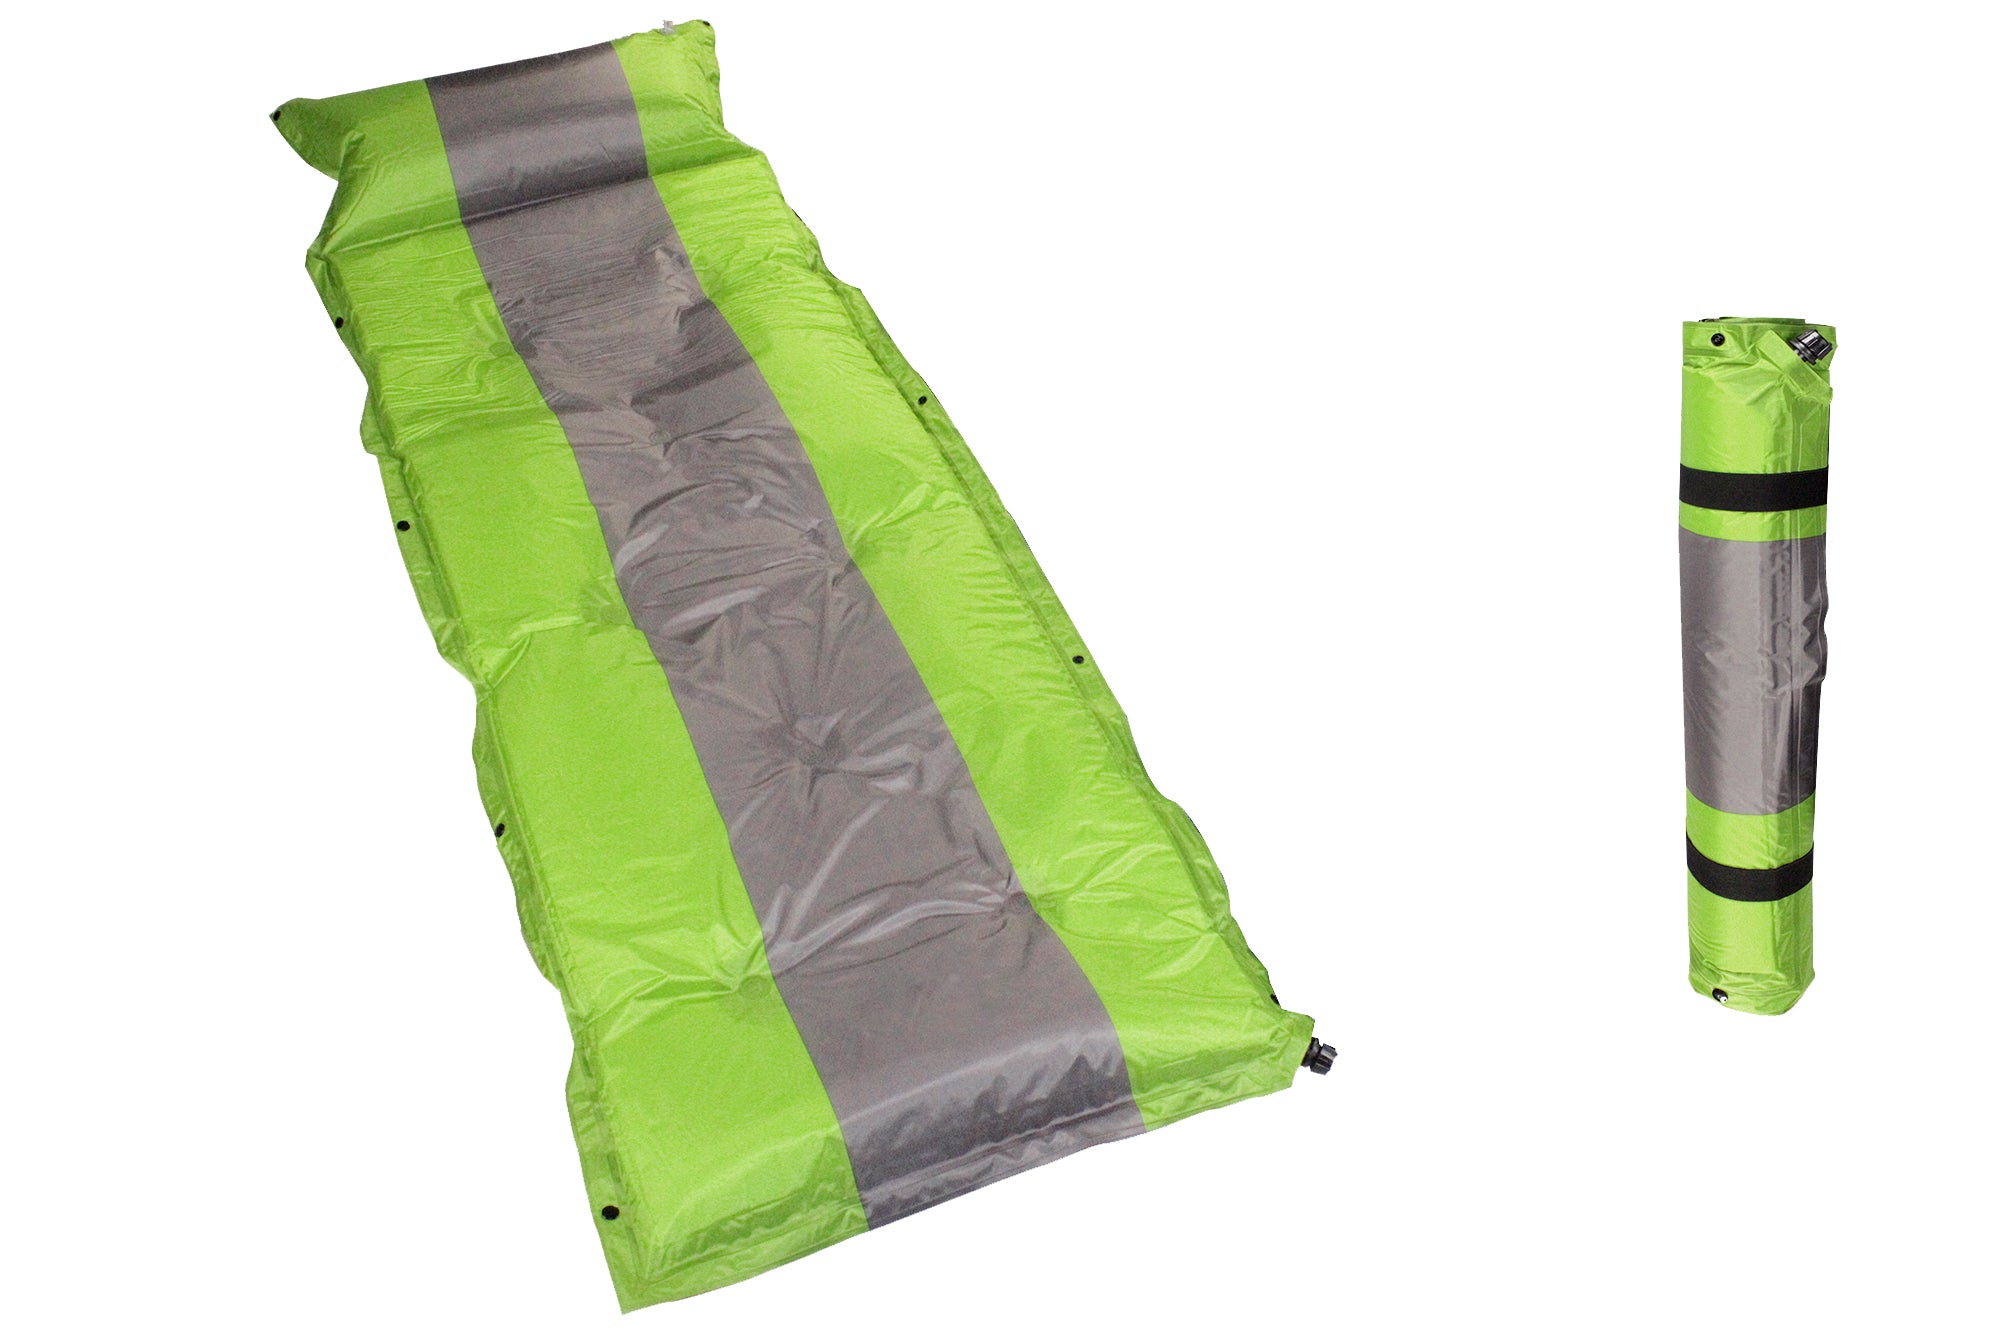 184x60cm Self-Inflating Single Camping Mattress with Inflatable Headrest